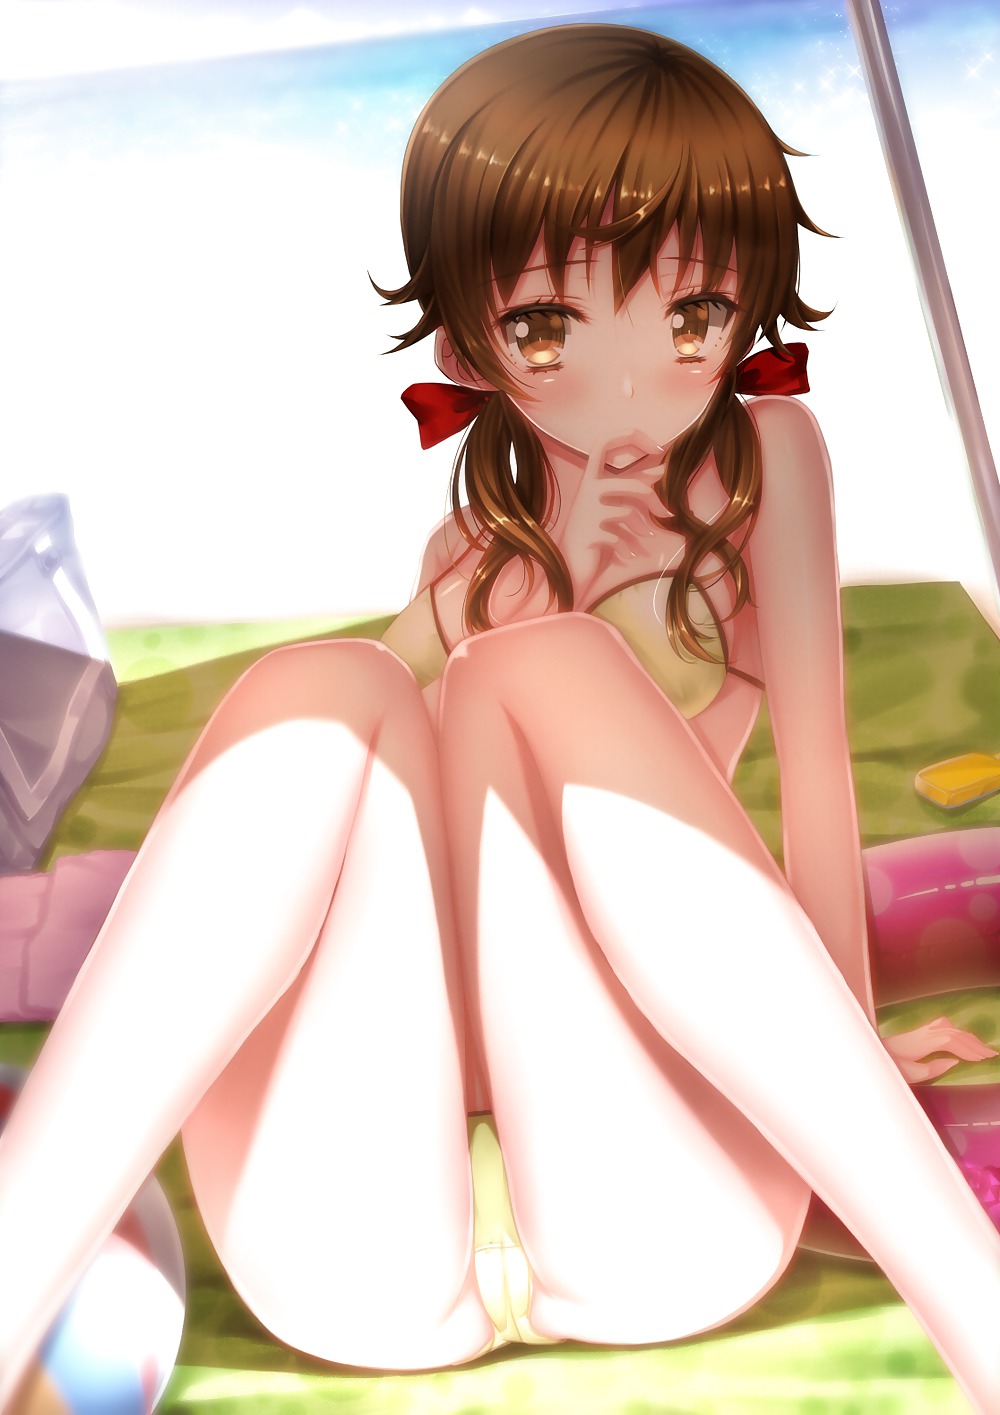 Anime girls in swimsuits #26274859